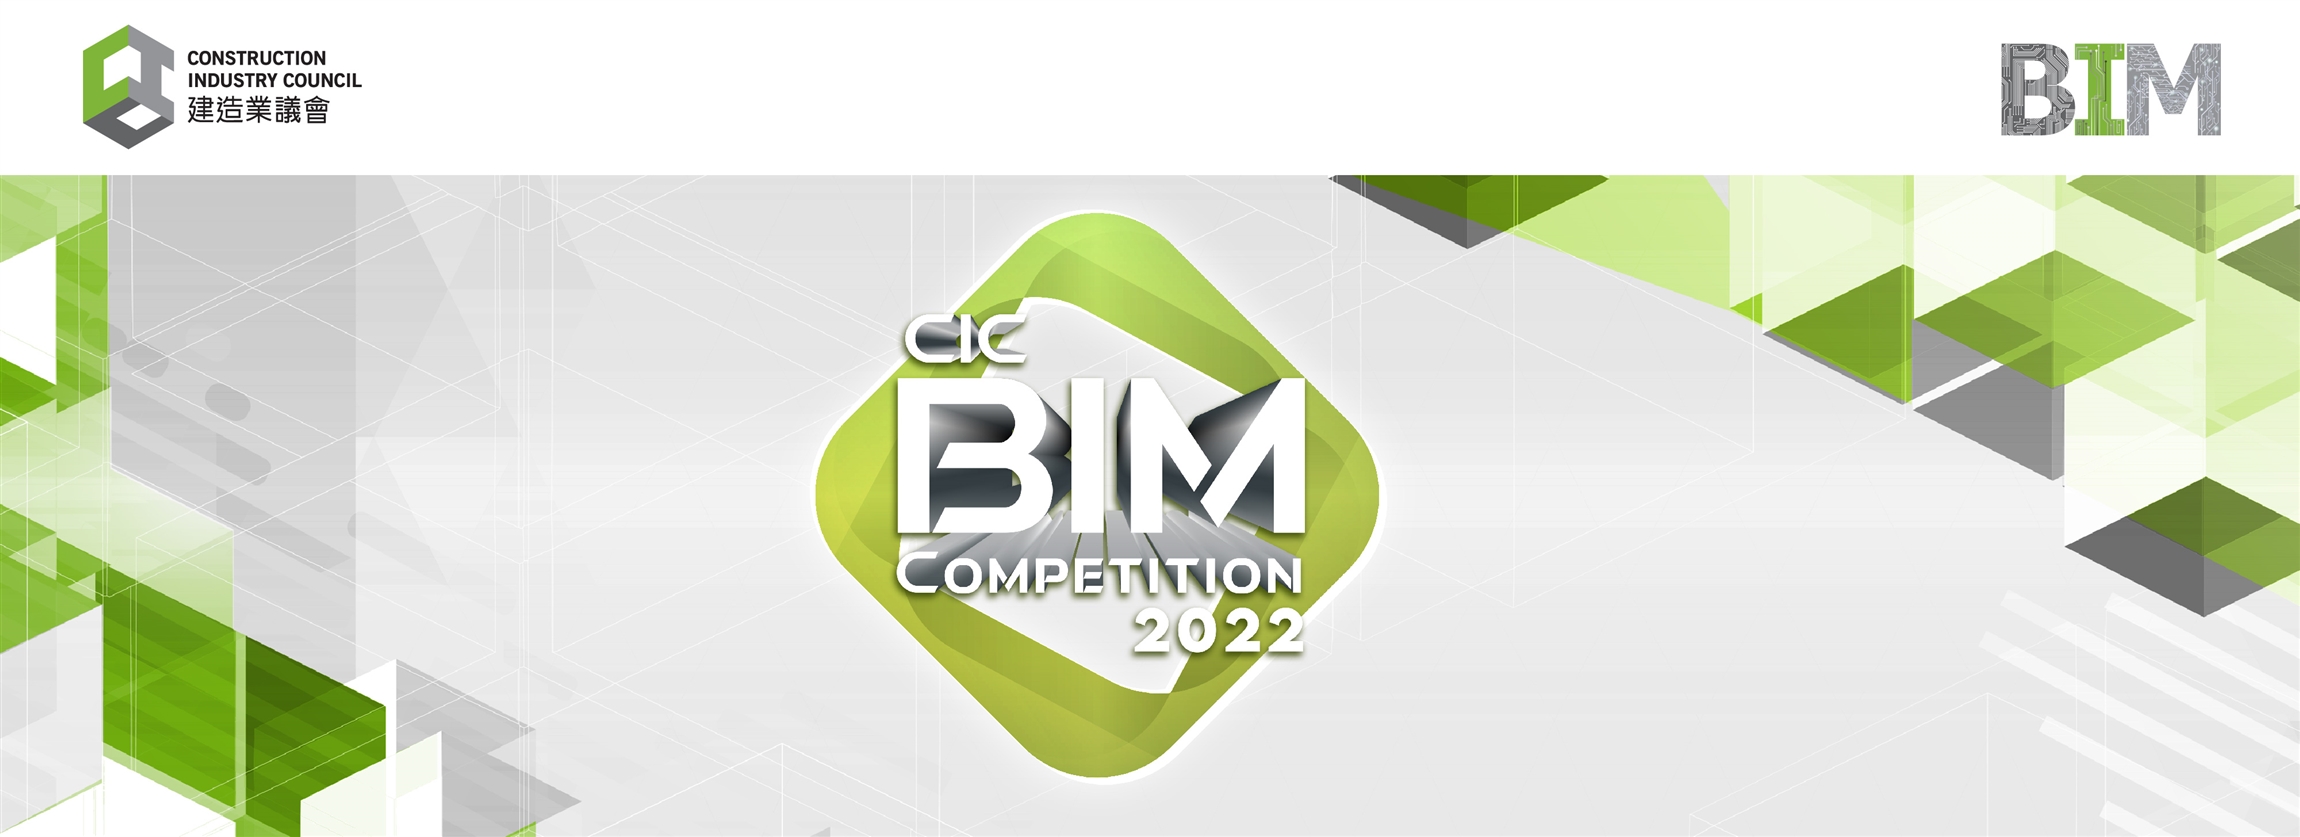 Self Photos / Files - Banner_BIM Competition 2022_with logo